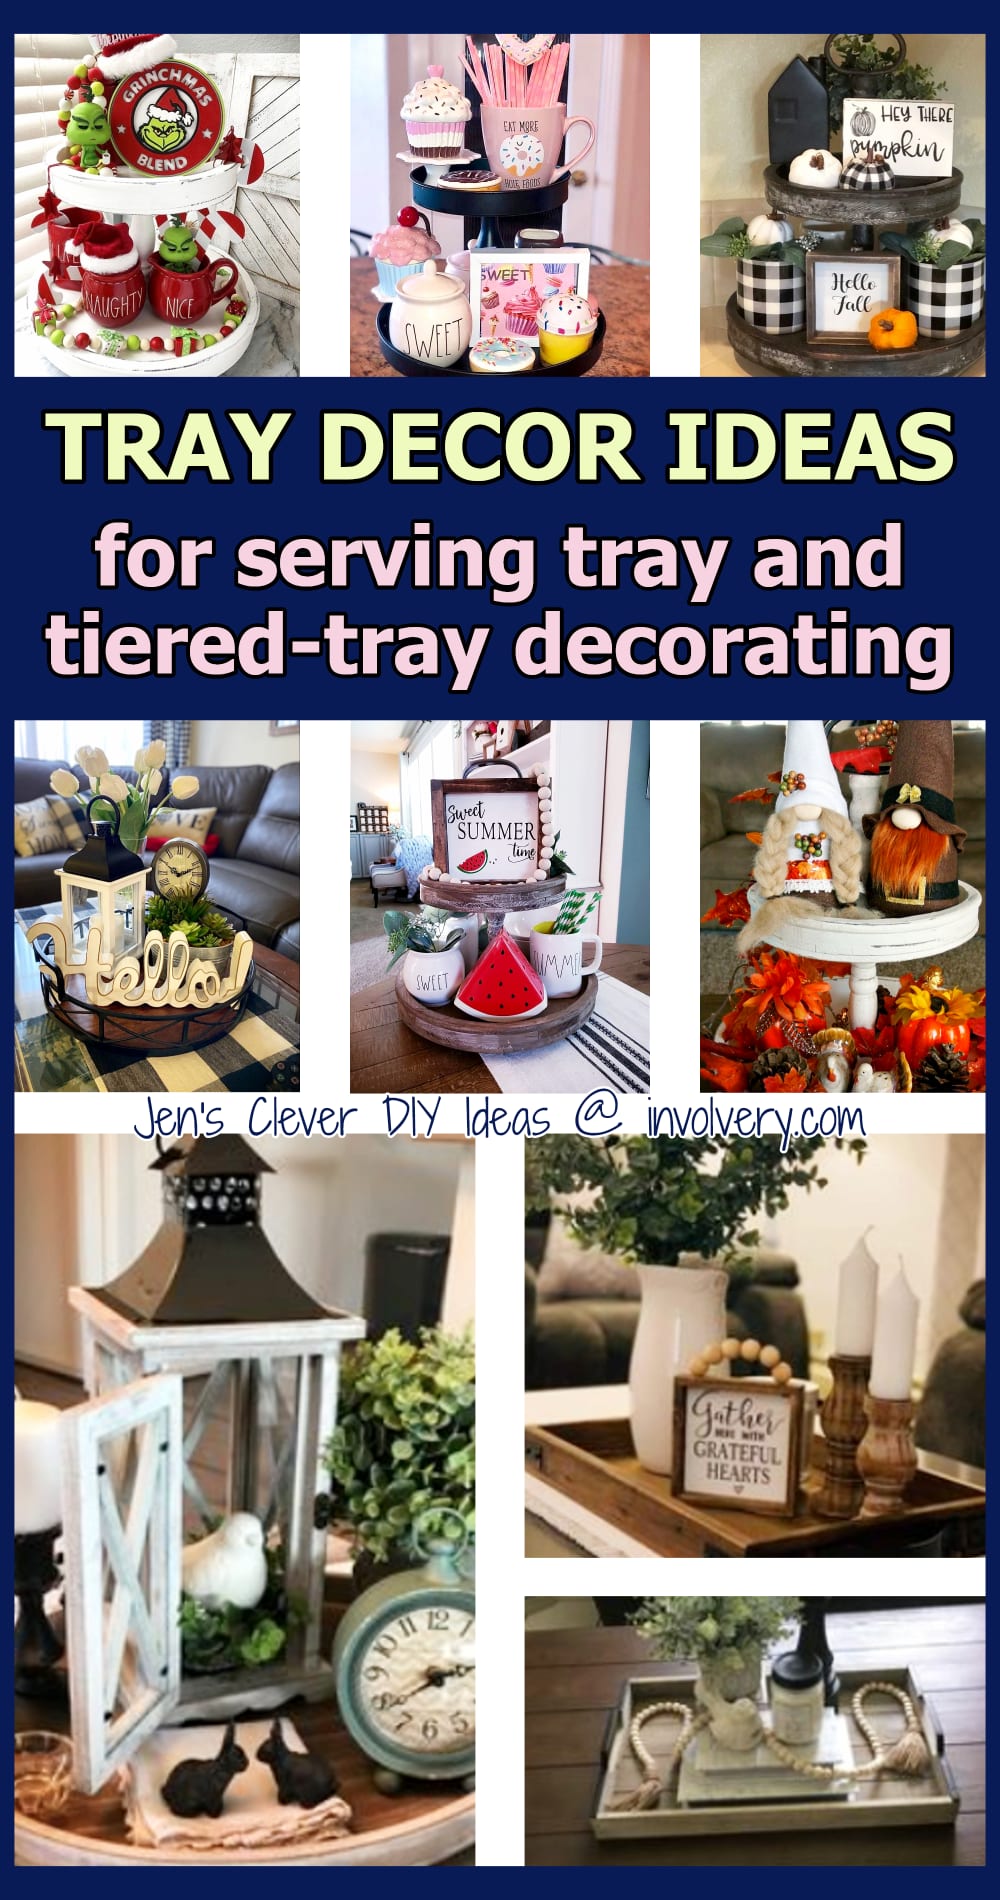 Tray decor ideas - tiered and wooden tray decorating and table tray decorating ideas for all Holidays, seasons, and decor themes for every room in your home